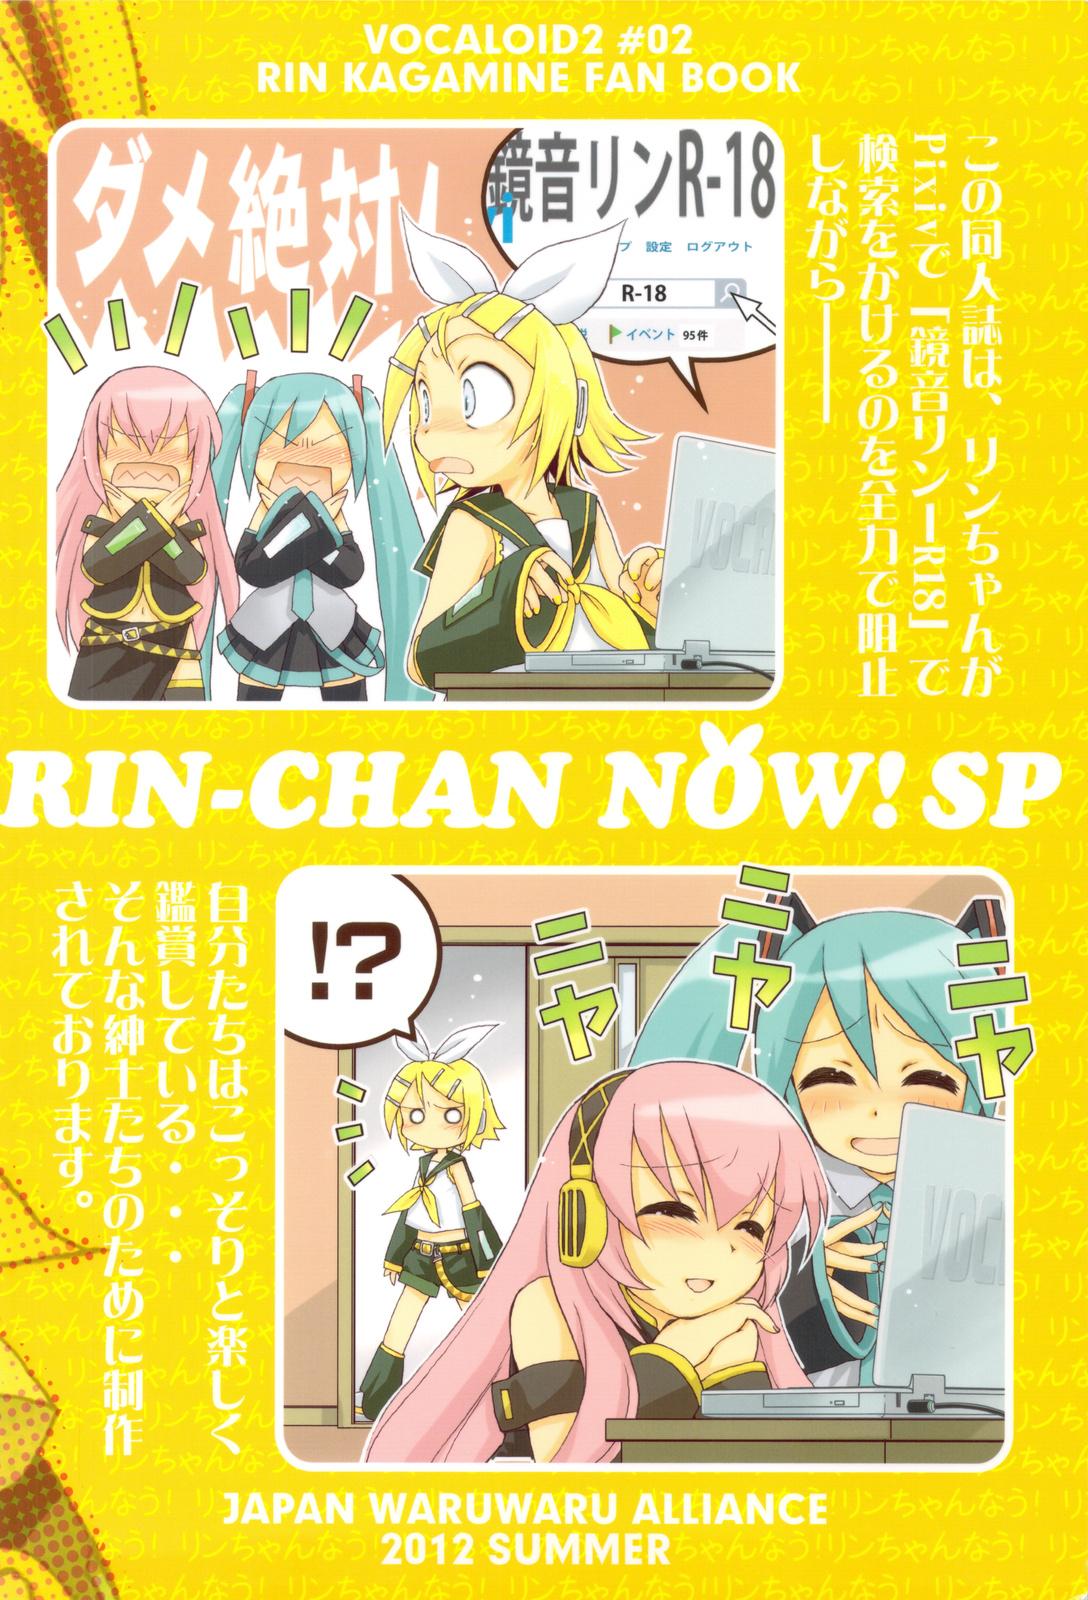 Vietnamese Rin-chan Now! SP - Vocaloid Blow - Page 24